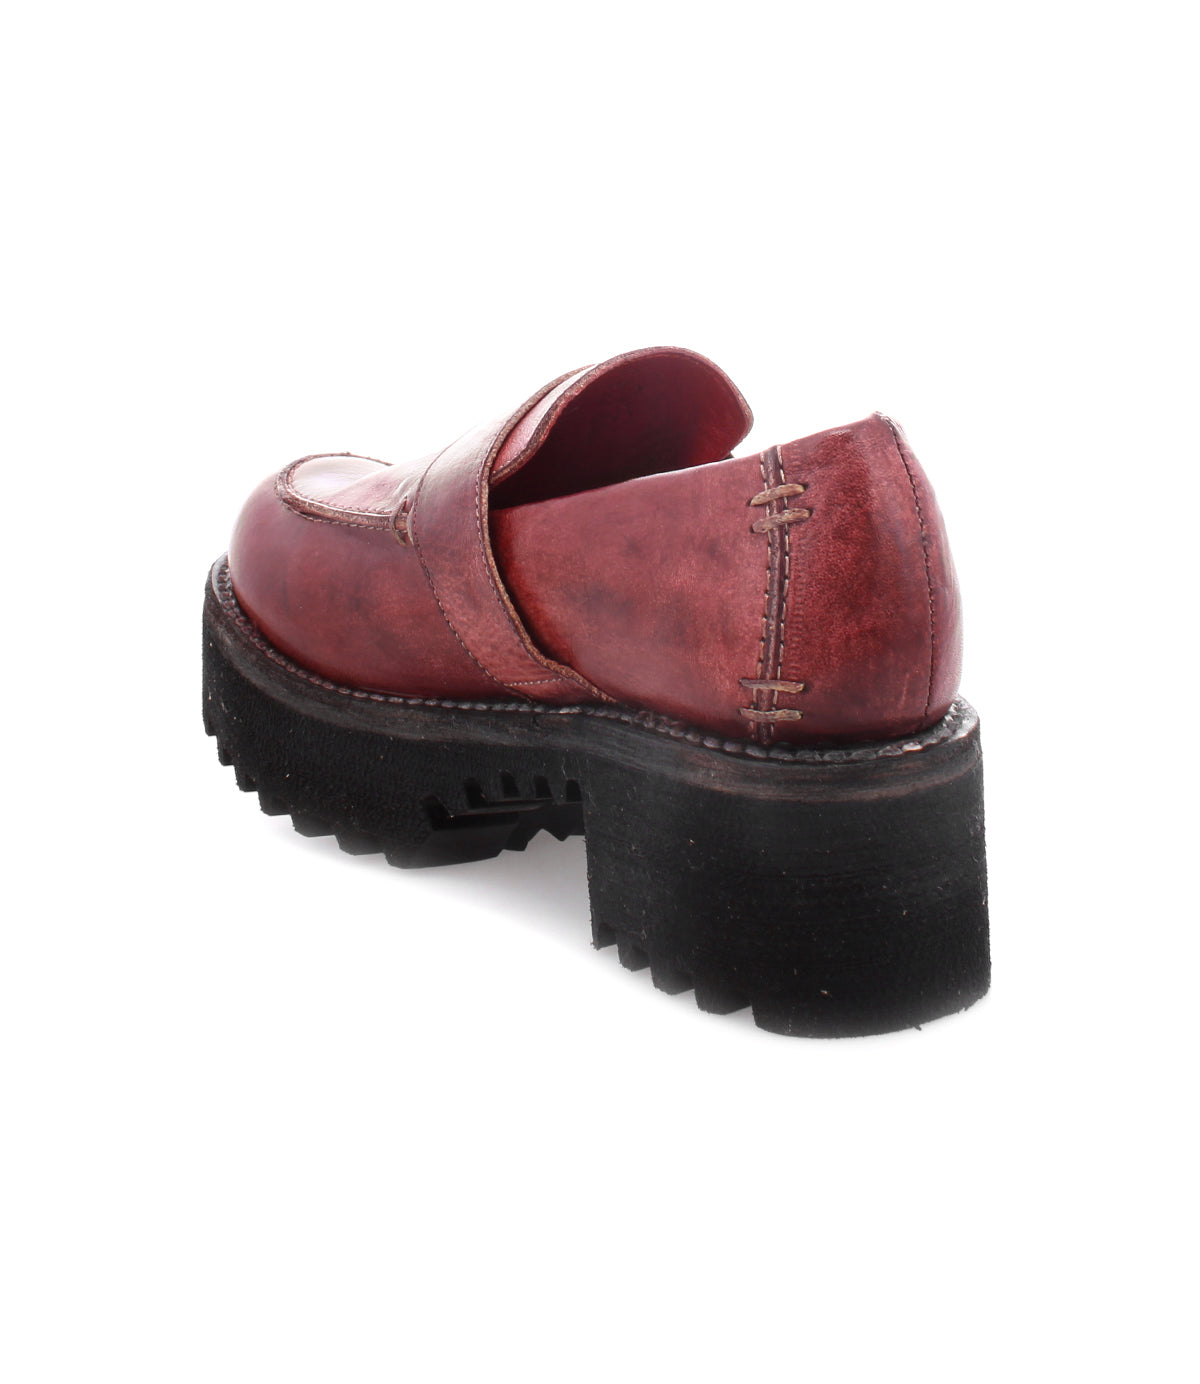 A comfortable women's Kavi leather loafer perfect for fall fashion by Bed Stu.